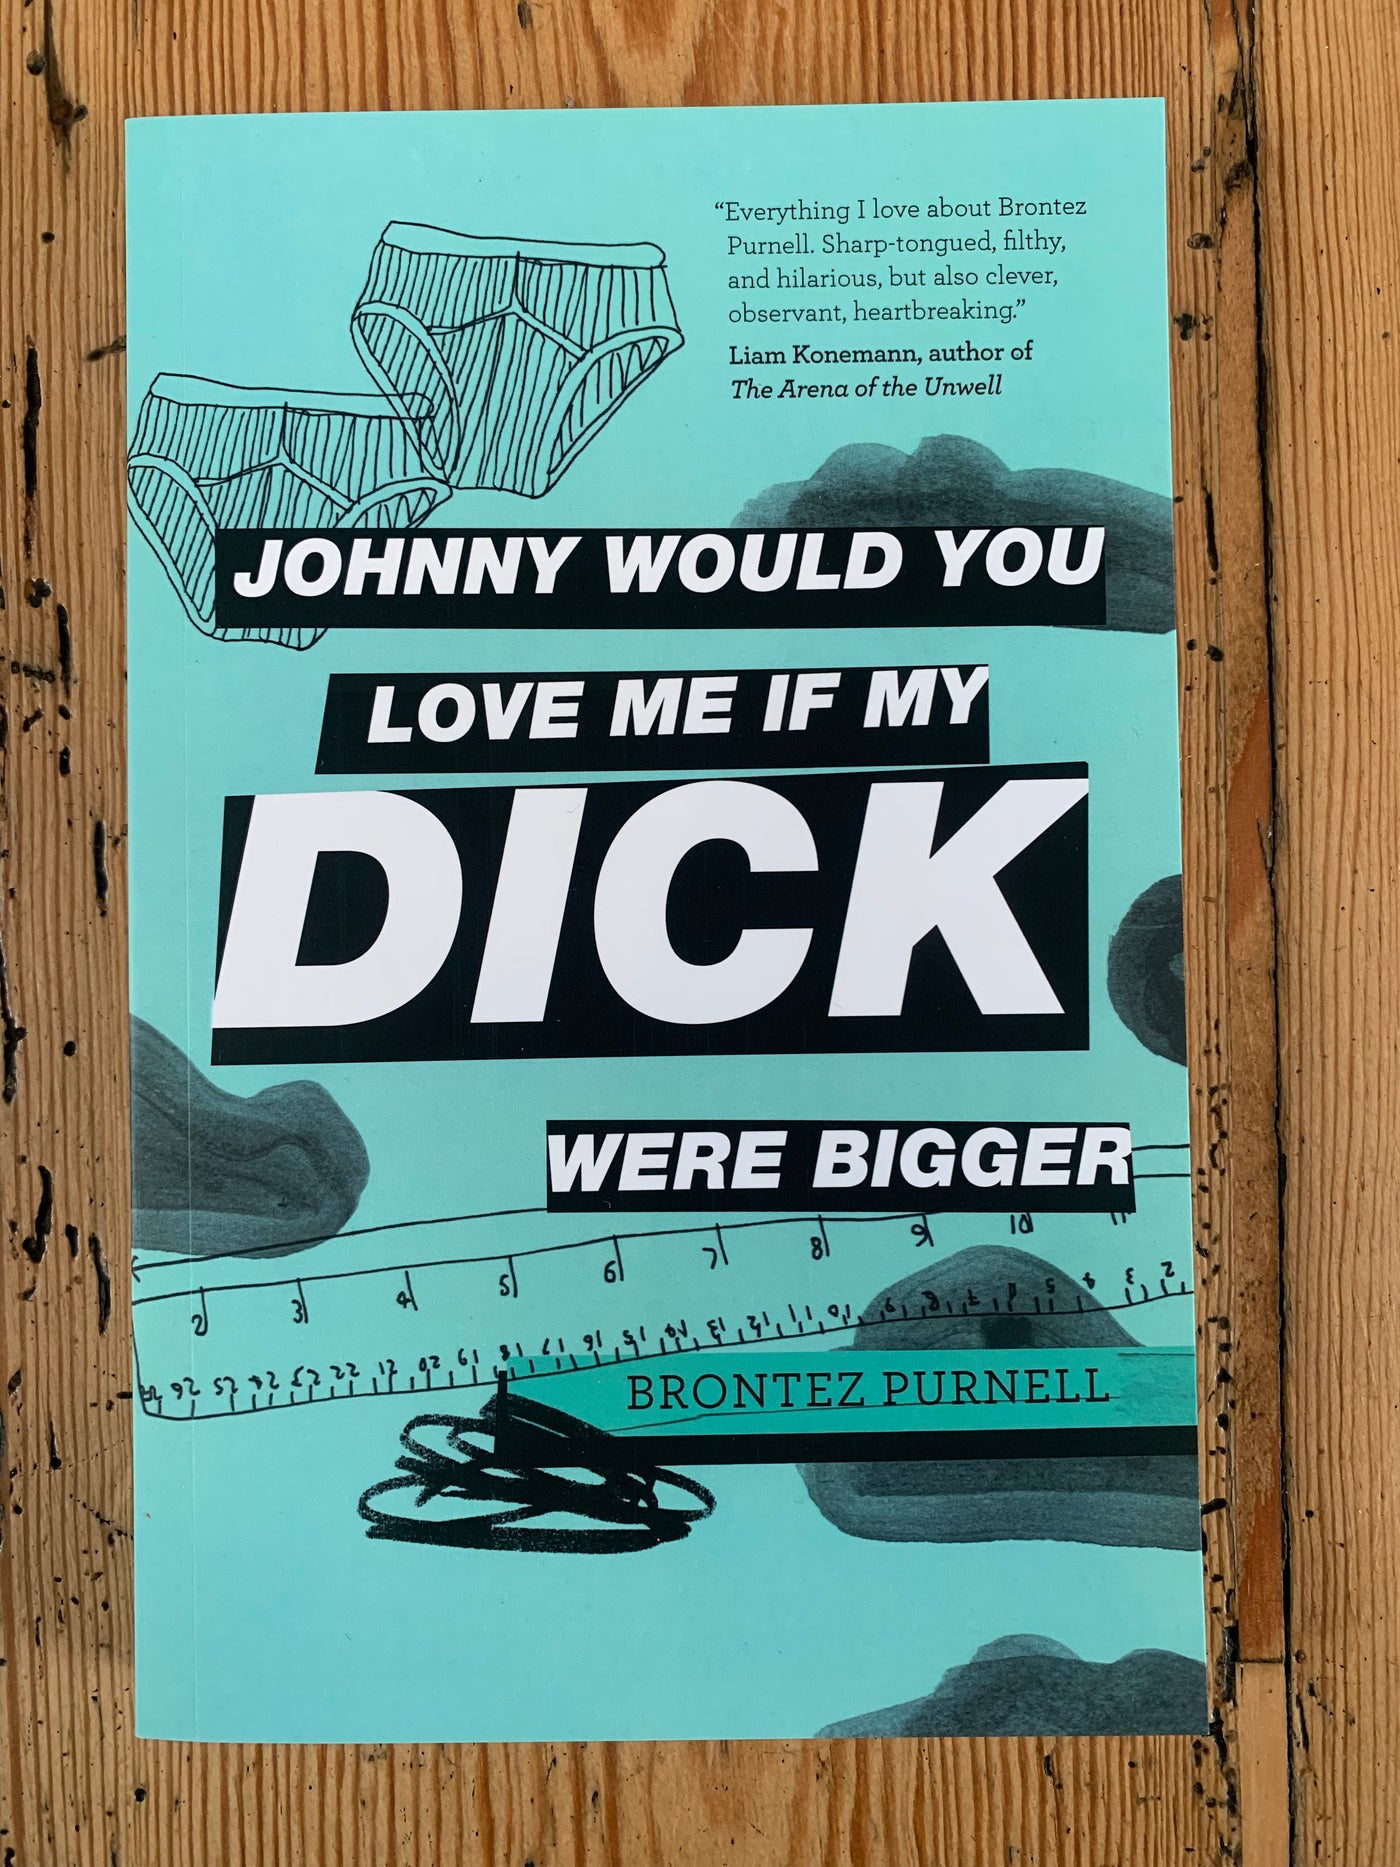 Johnny would you love me if my dick were bigger